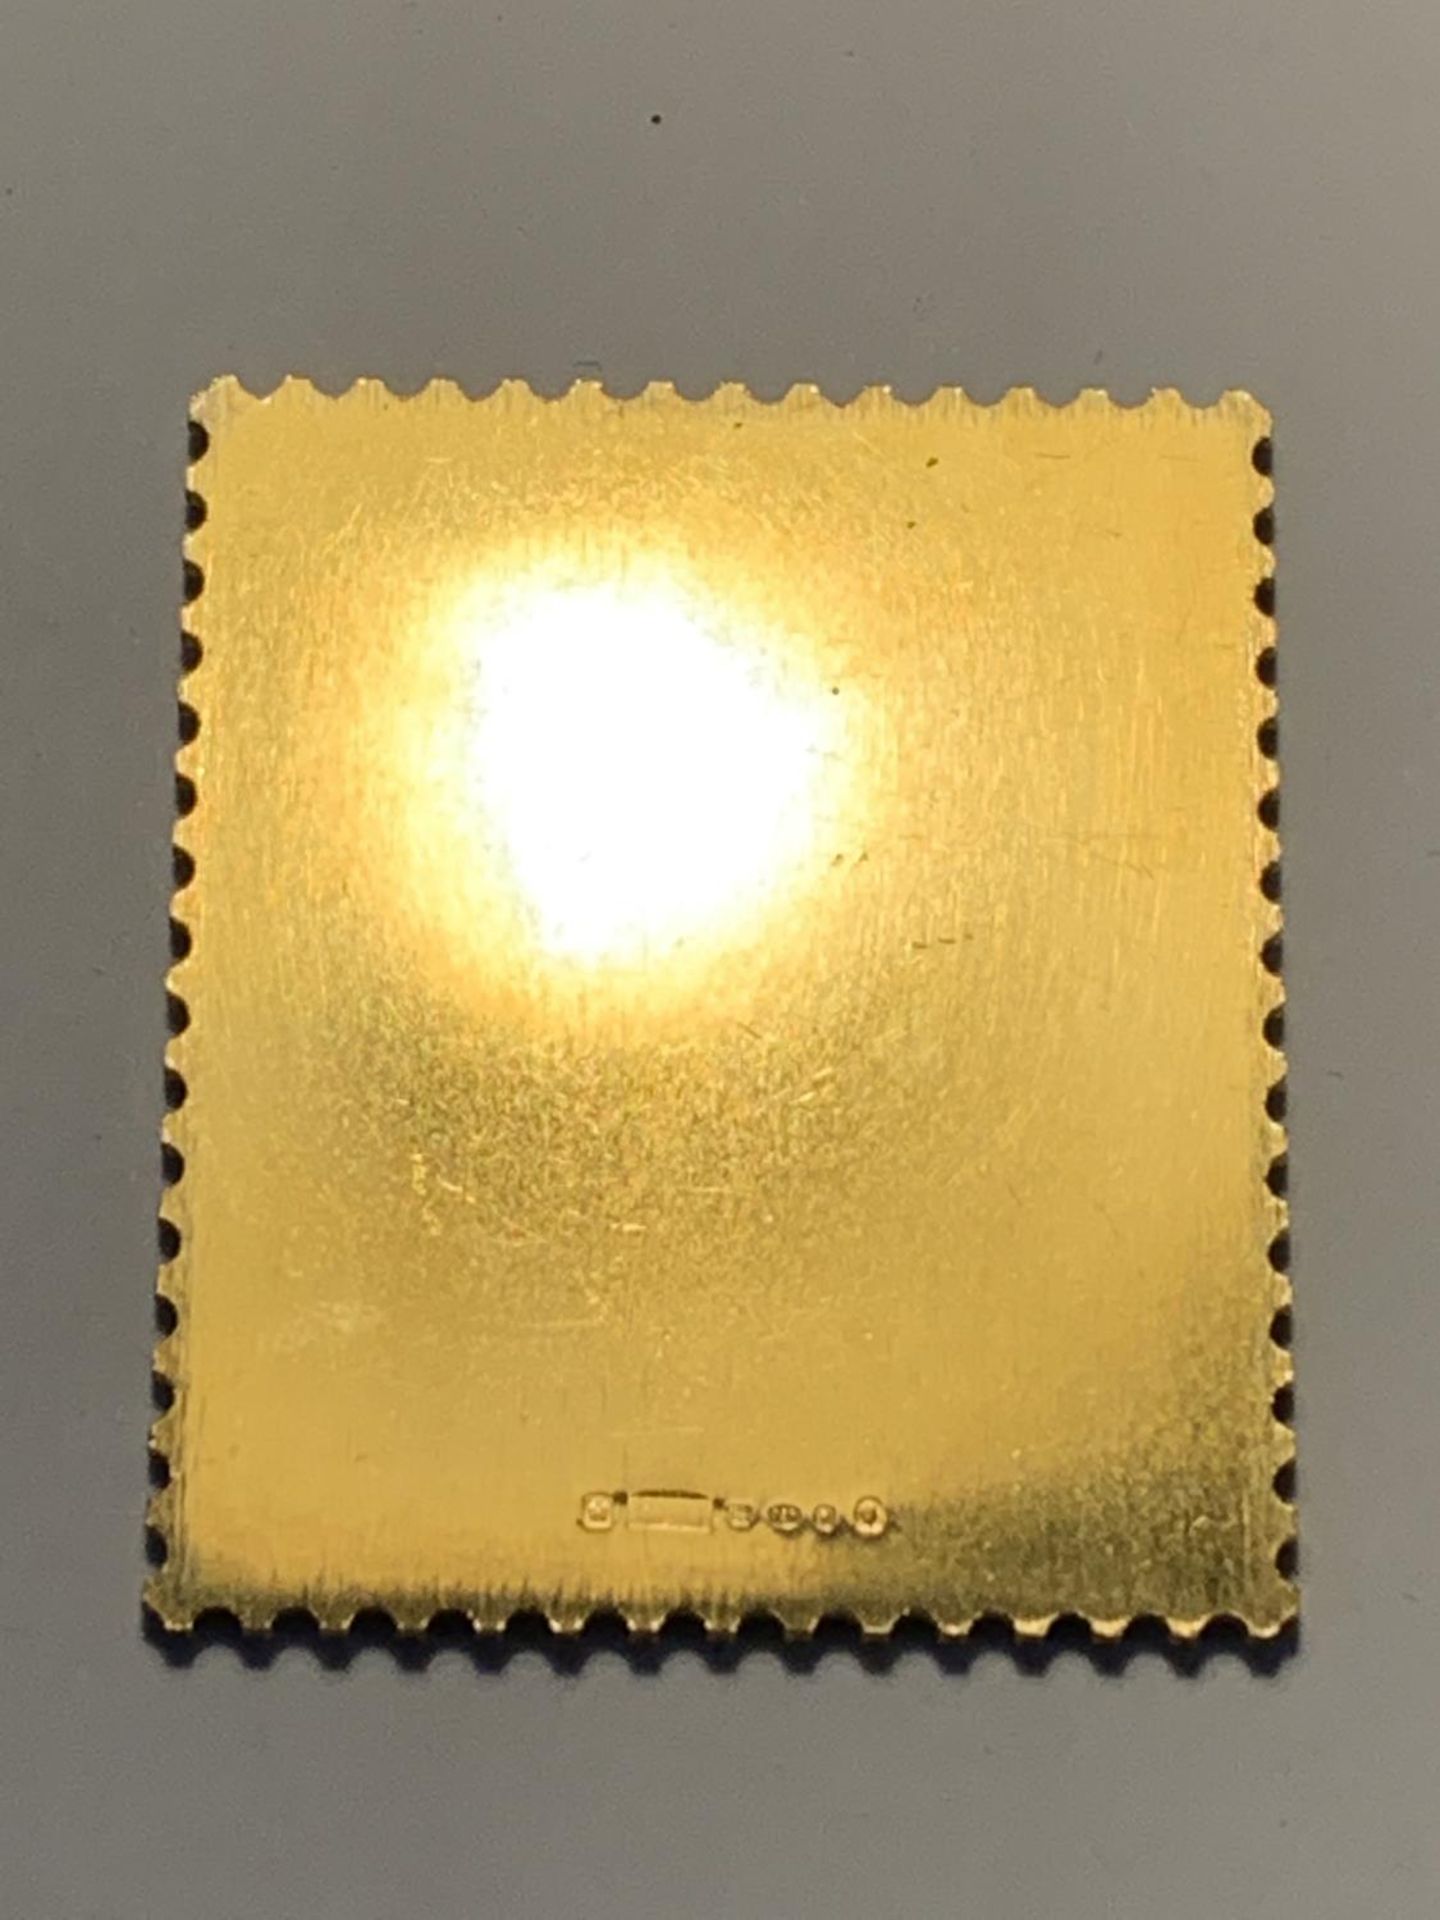 A SILVER GILT 2 1/2D STAMP - Image 2 of 2